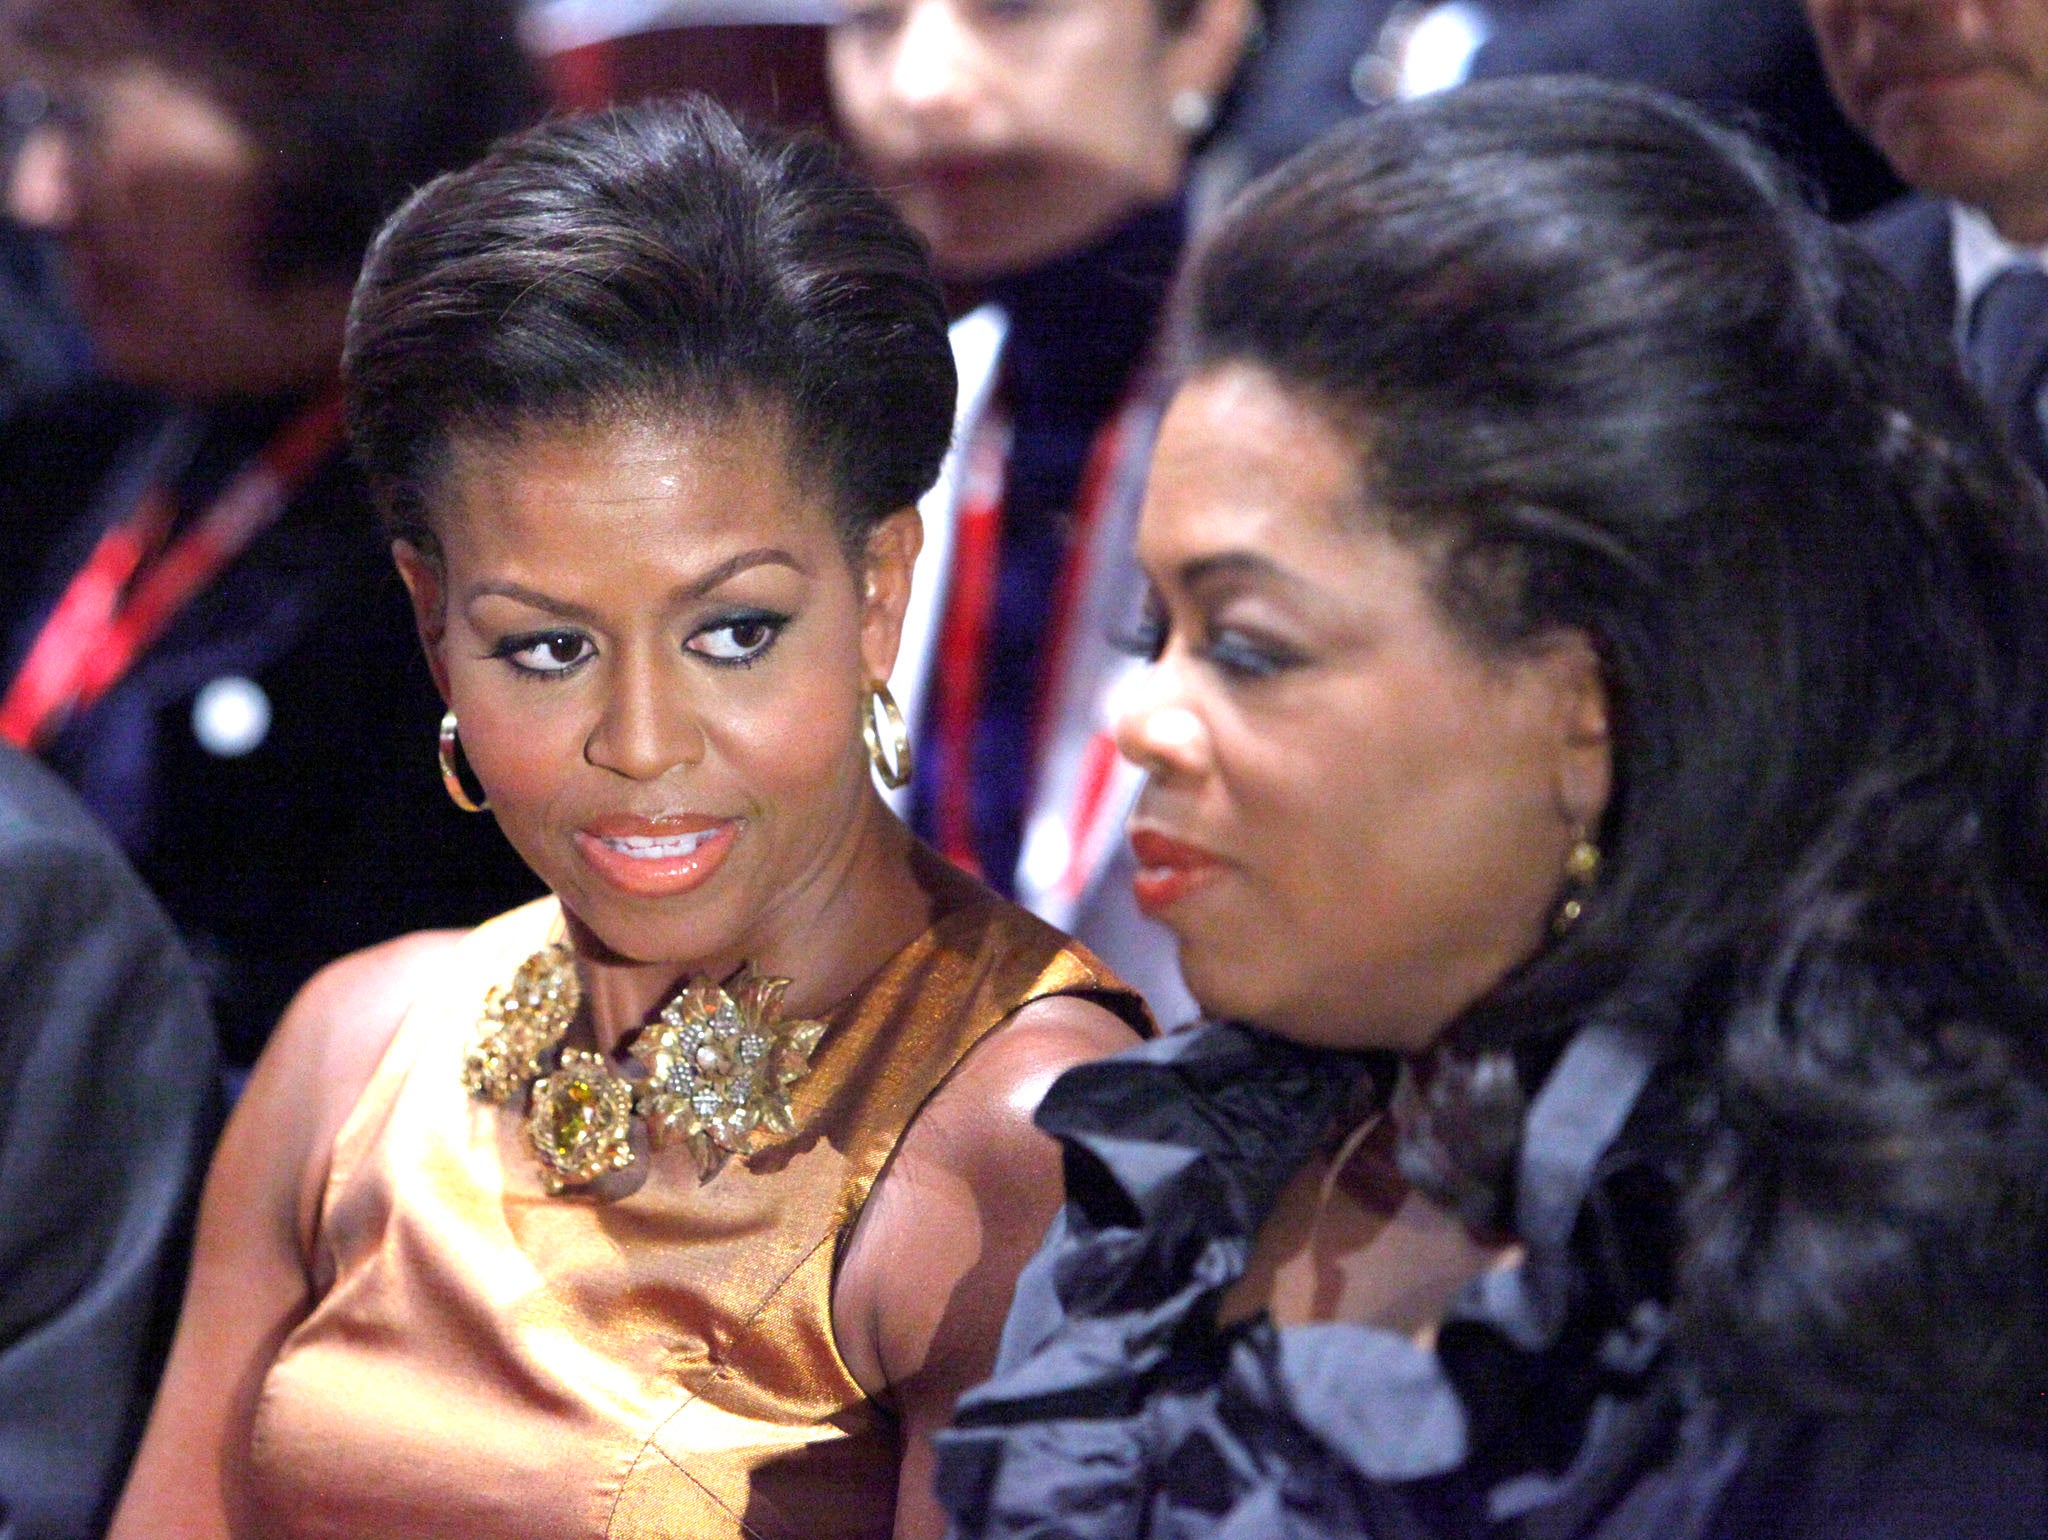 Wondering where Michelle Obama and Oprah Winfrey have disappeared to?